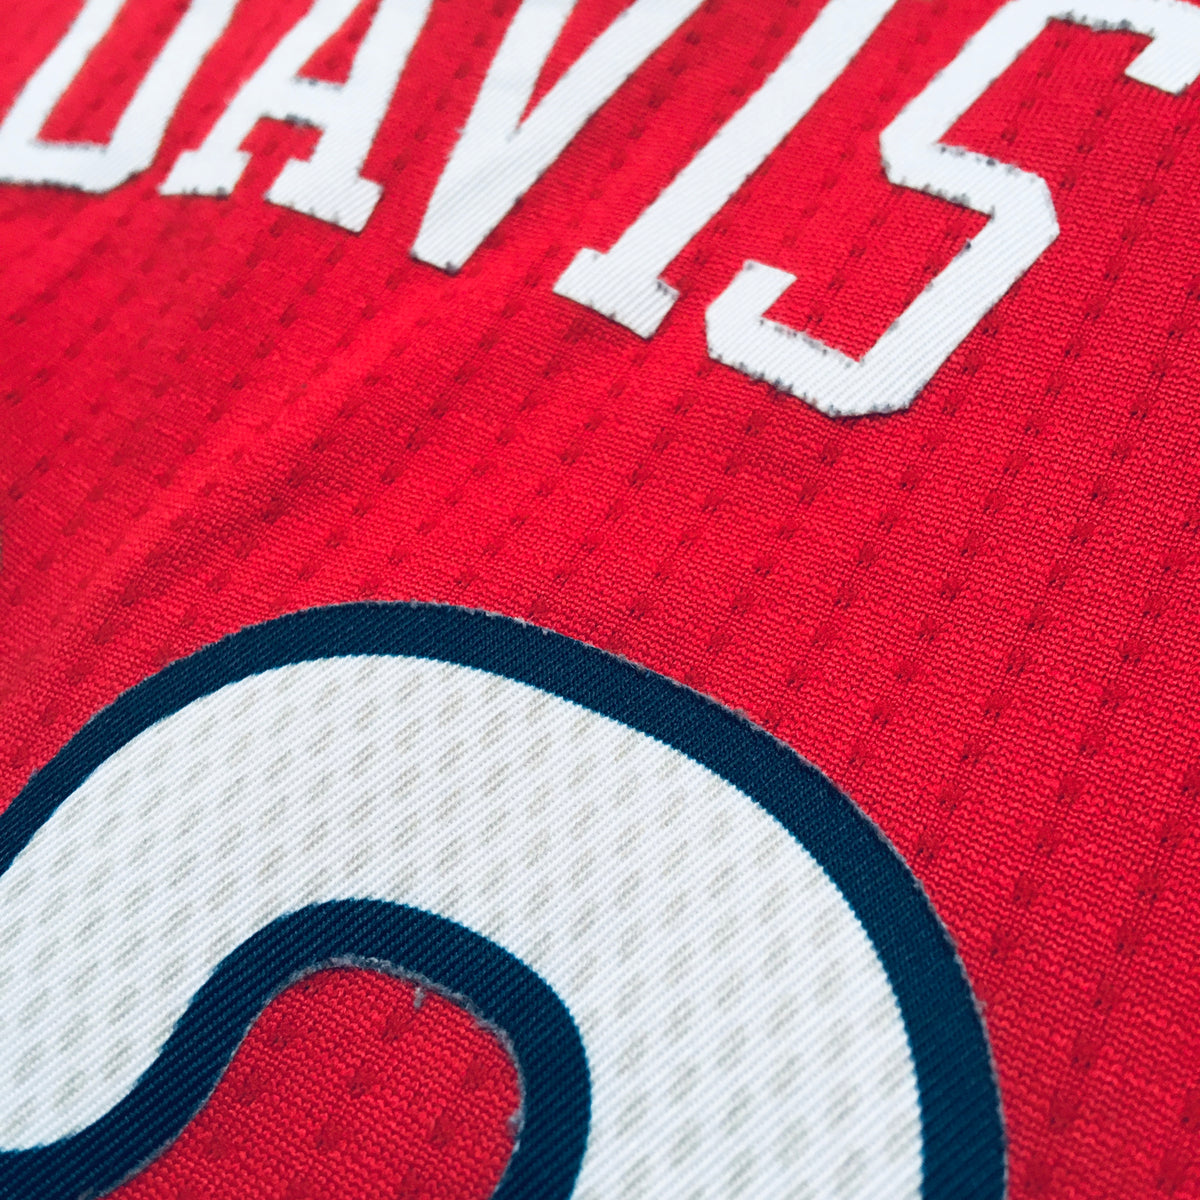 New Orleans Pelicans: Anthony Davis 2013/14 Red Adidas Stitched Jersey –  National Vintage League Ltd.